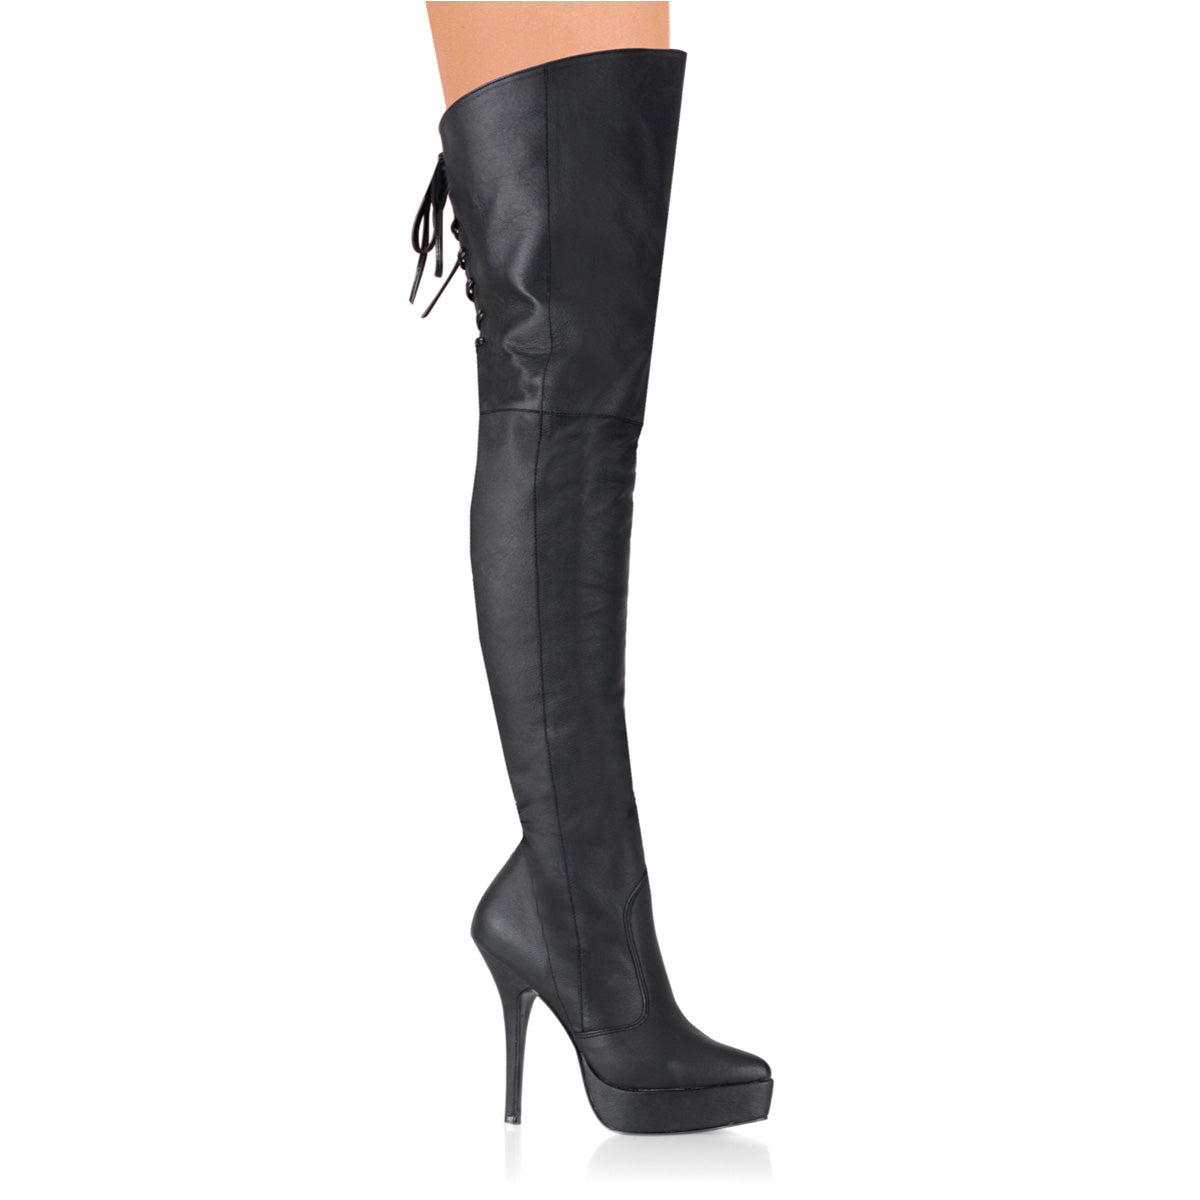 INDULGE 3011 Devious 5" Heel Black Leather Sexy Thigh Boots Devious Heels